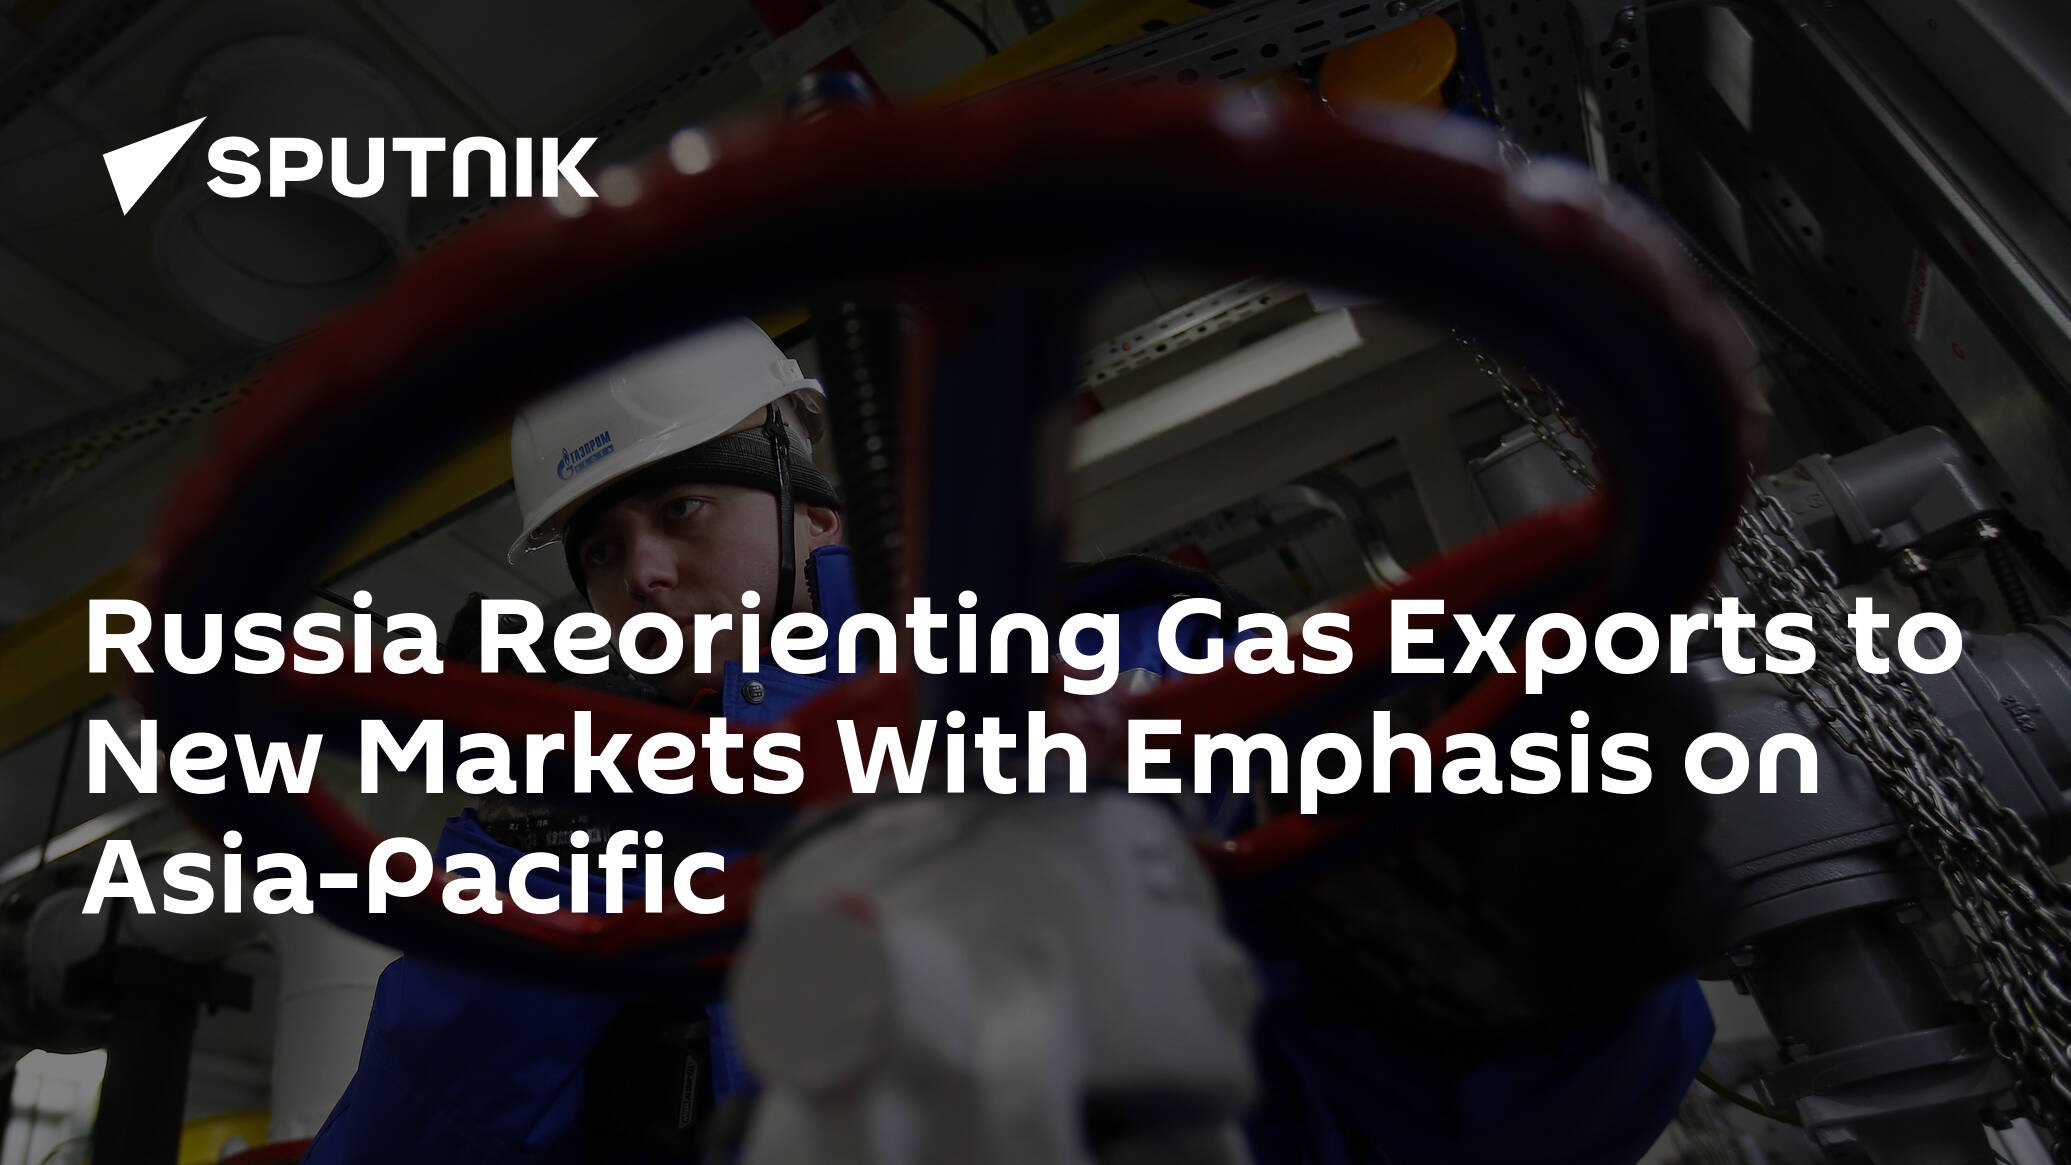 Russia Reorienting Gas Exports to New Markets With Emphasis on Asia-Pacific